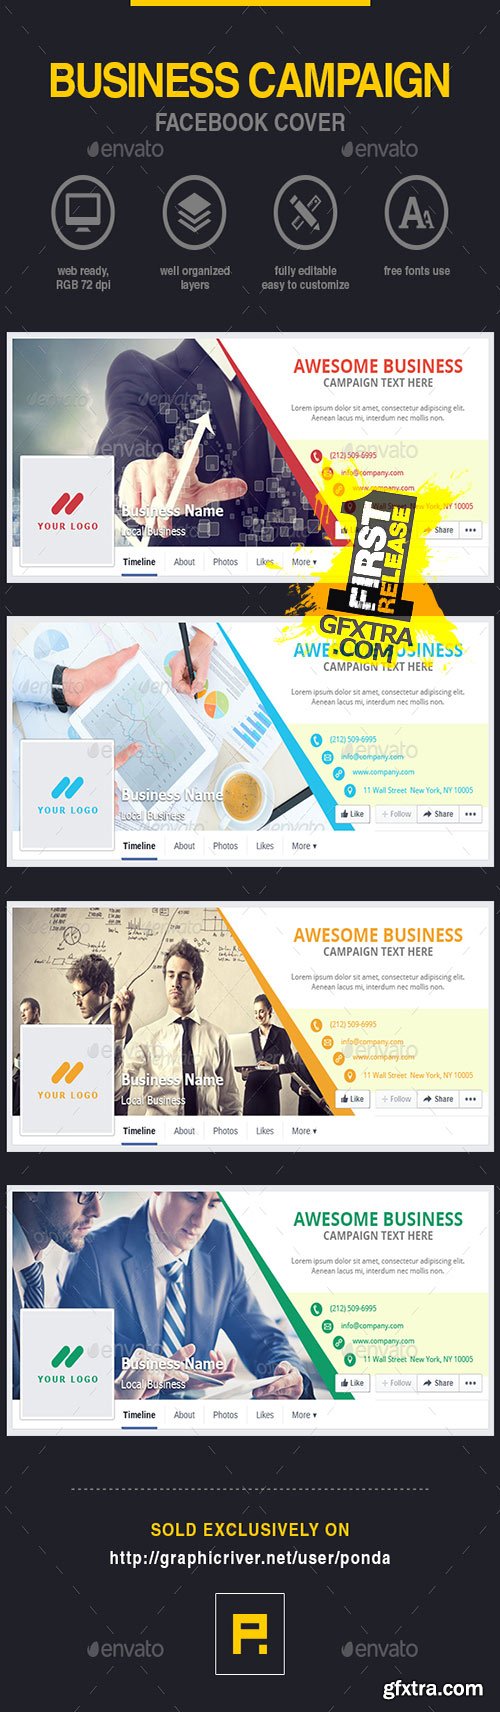 GraphicRiver - Business Campaign Facebook Cover 10373723